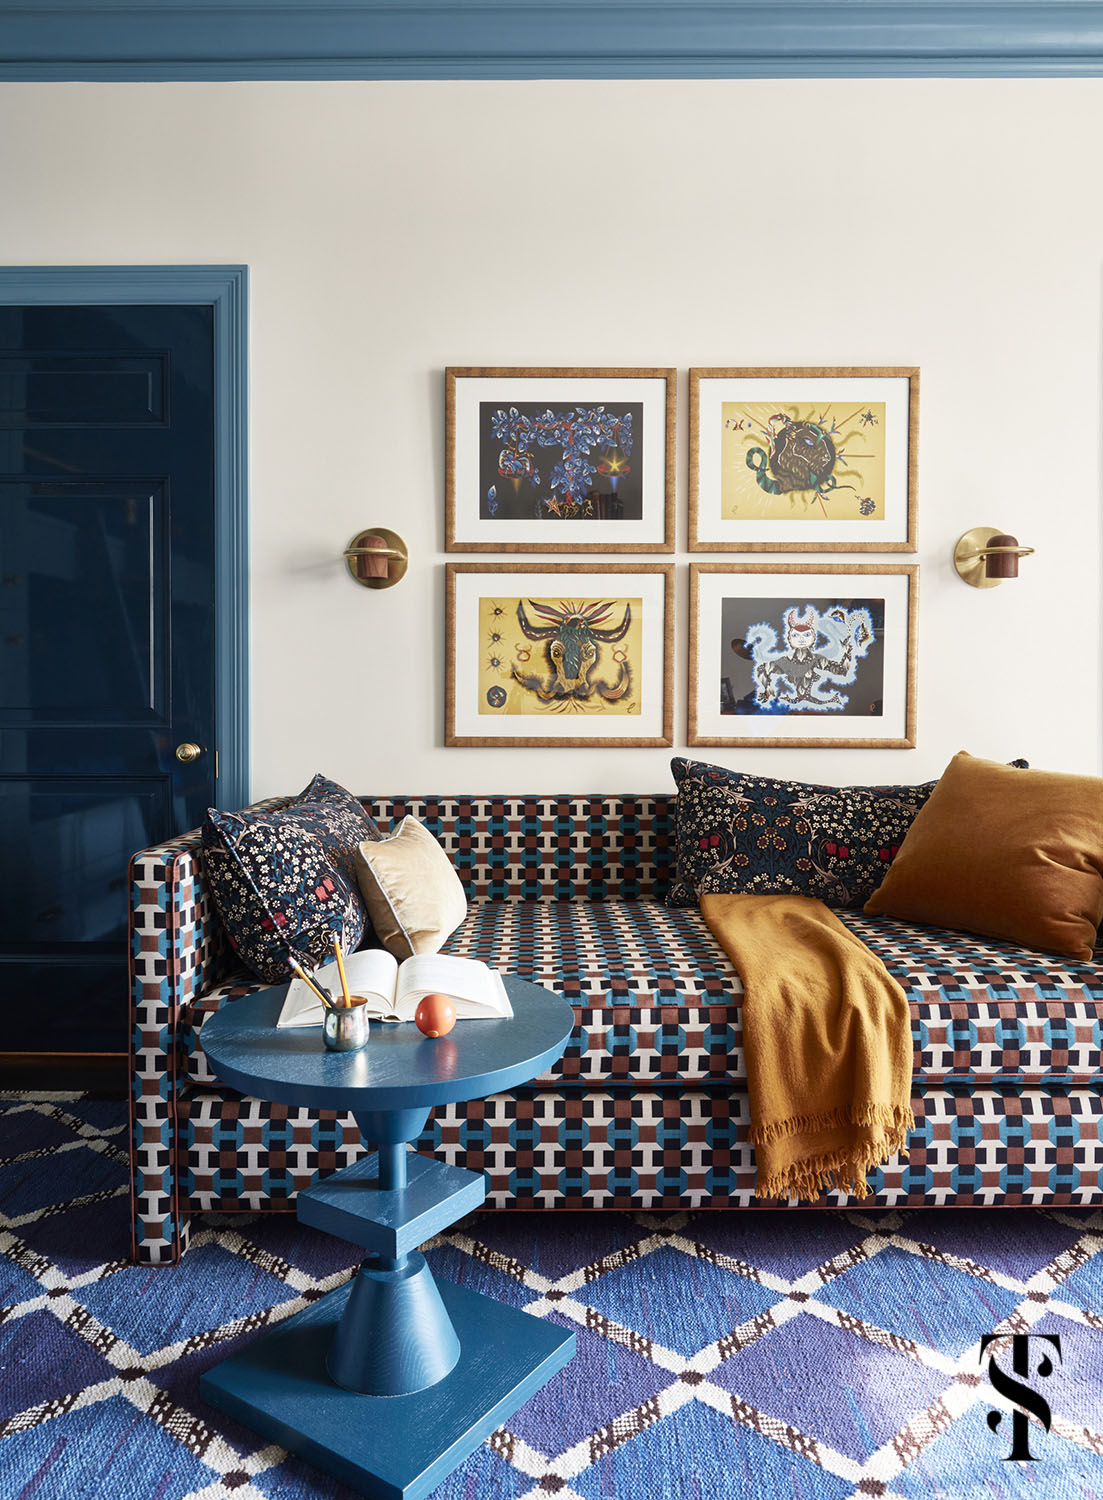 A sophisticated boy's room by Summer Thornton with dark blue doors in high gloss, aqua trim, and Hermes upholstered day bed.